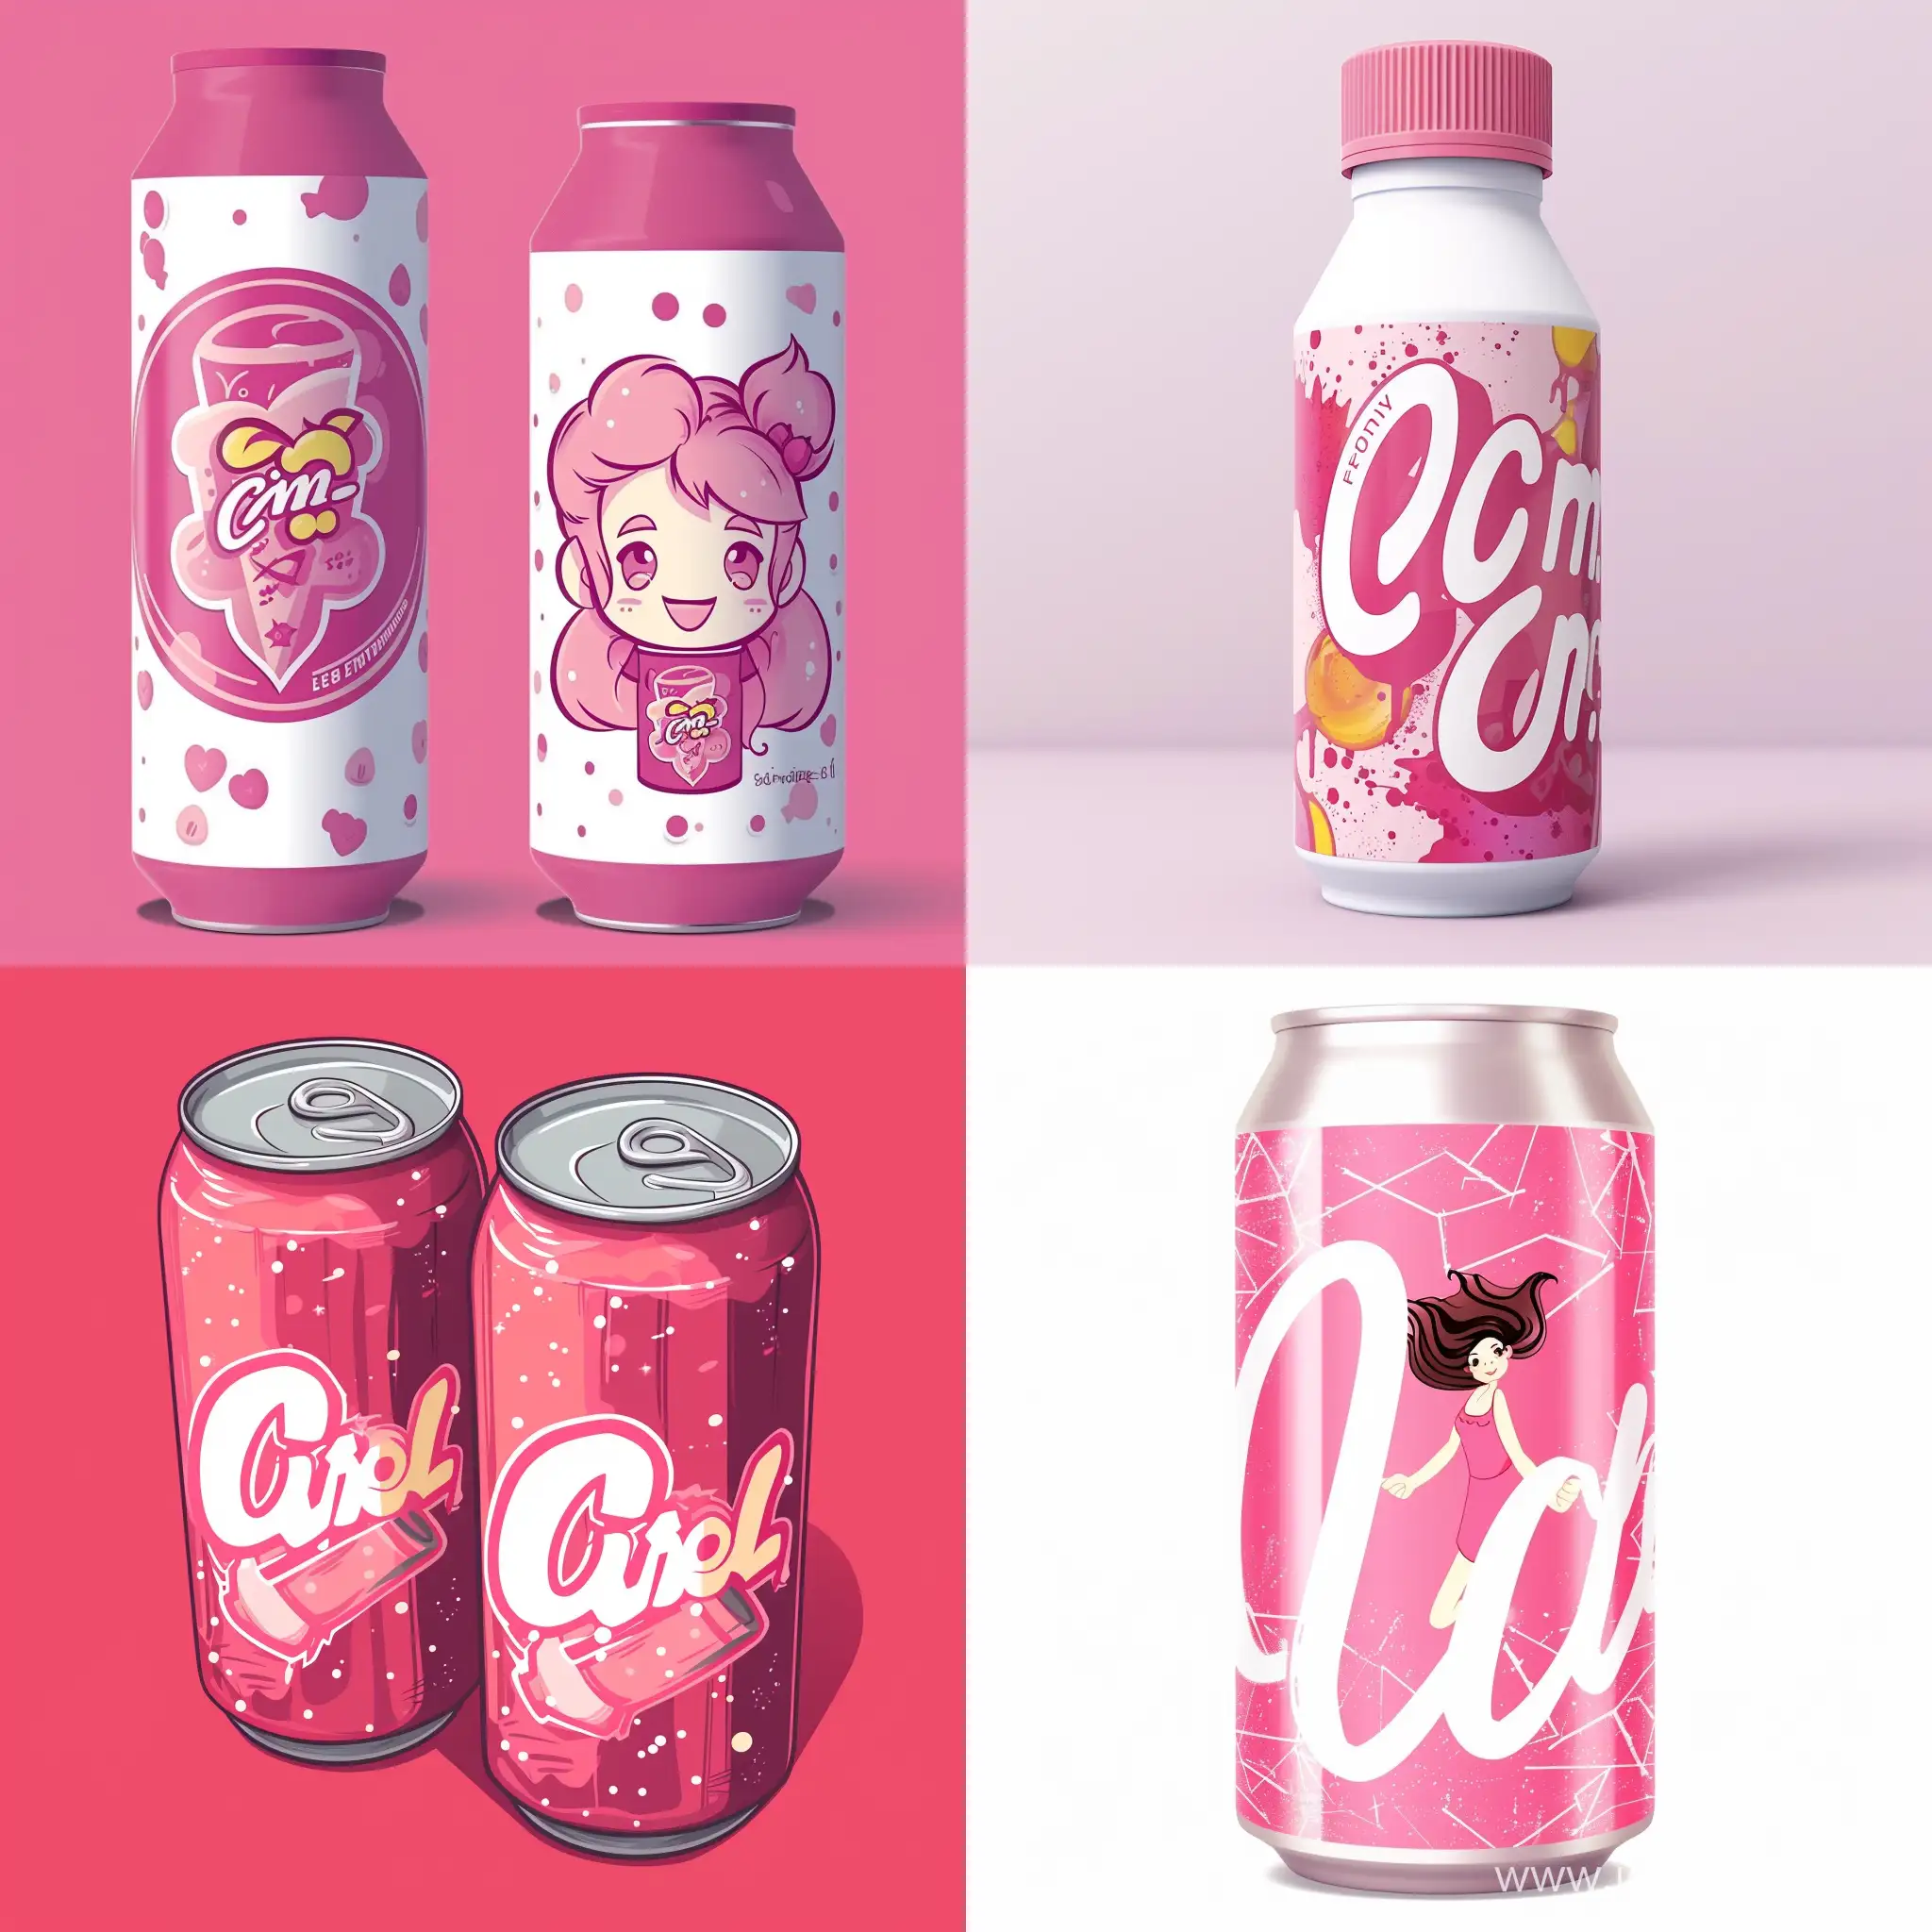 An energydrink for girls. Very girly and pink with a pink and cute logo.